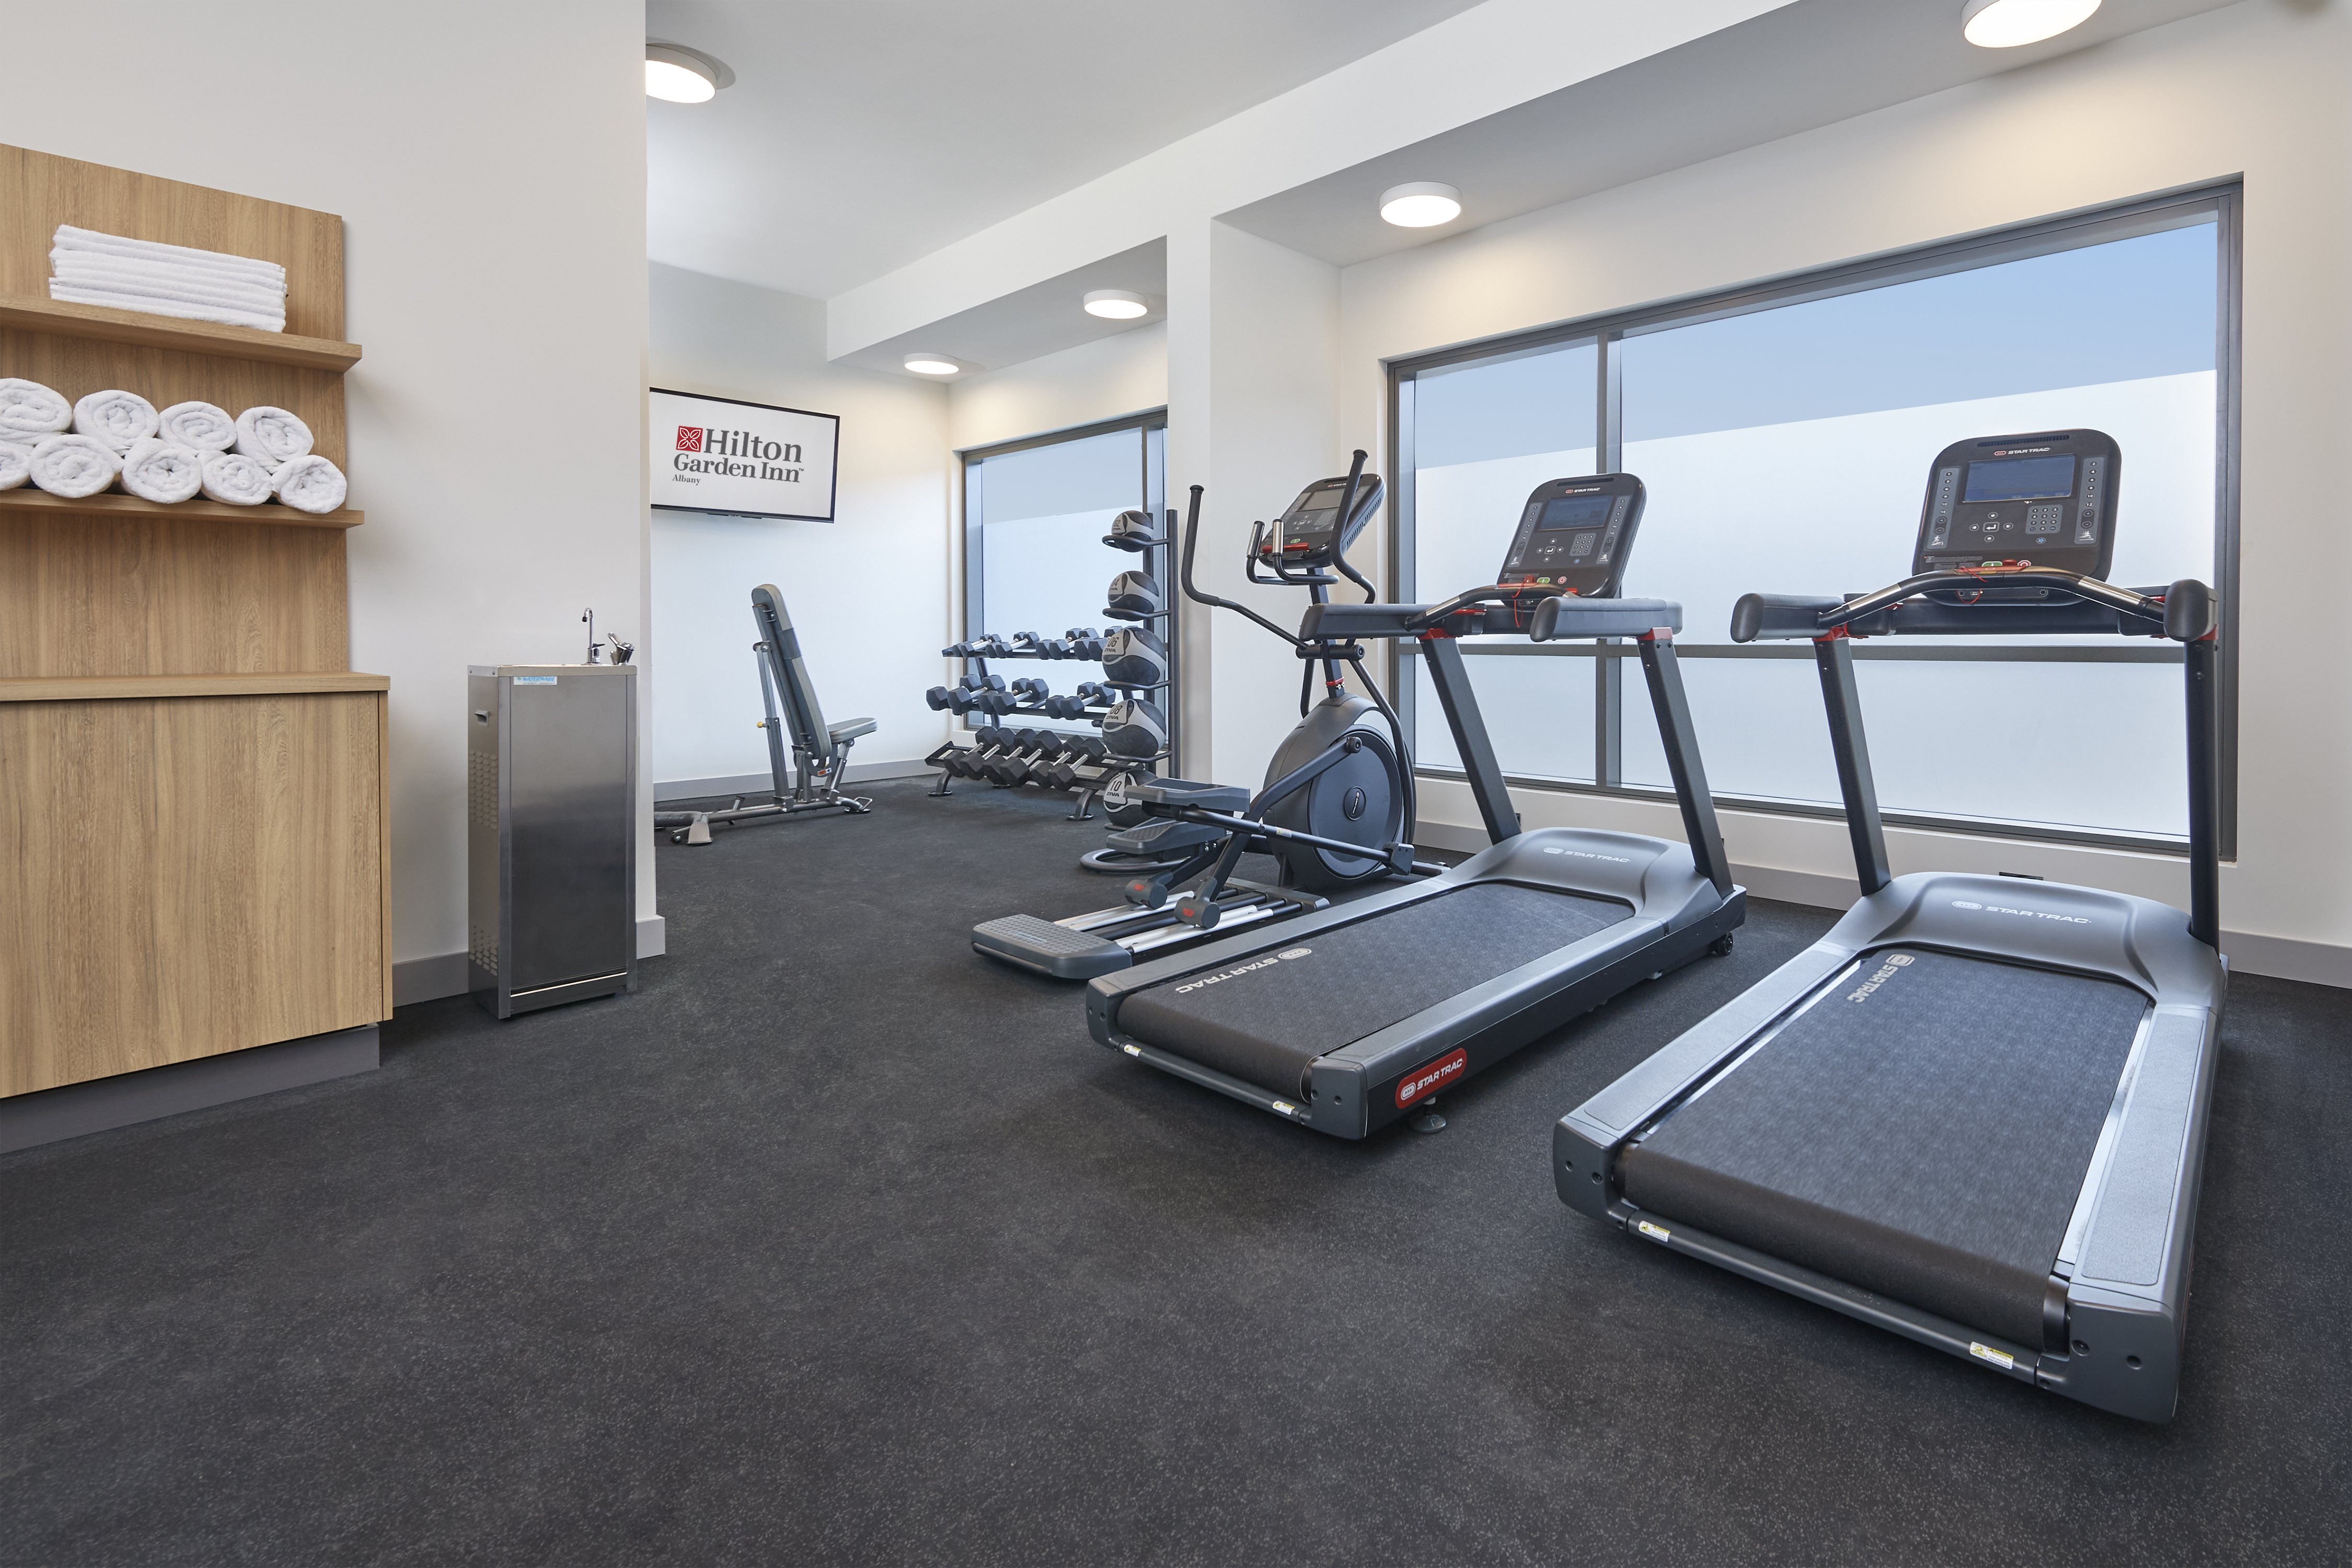 Fitness center cardio machines and free weights